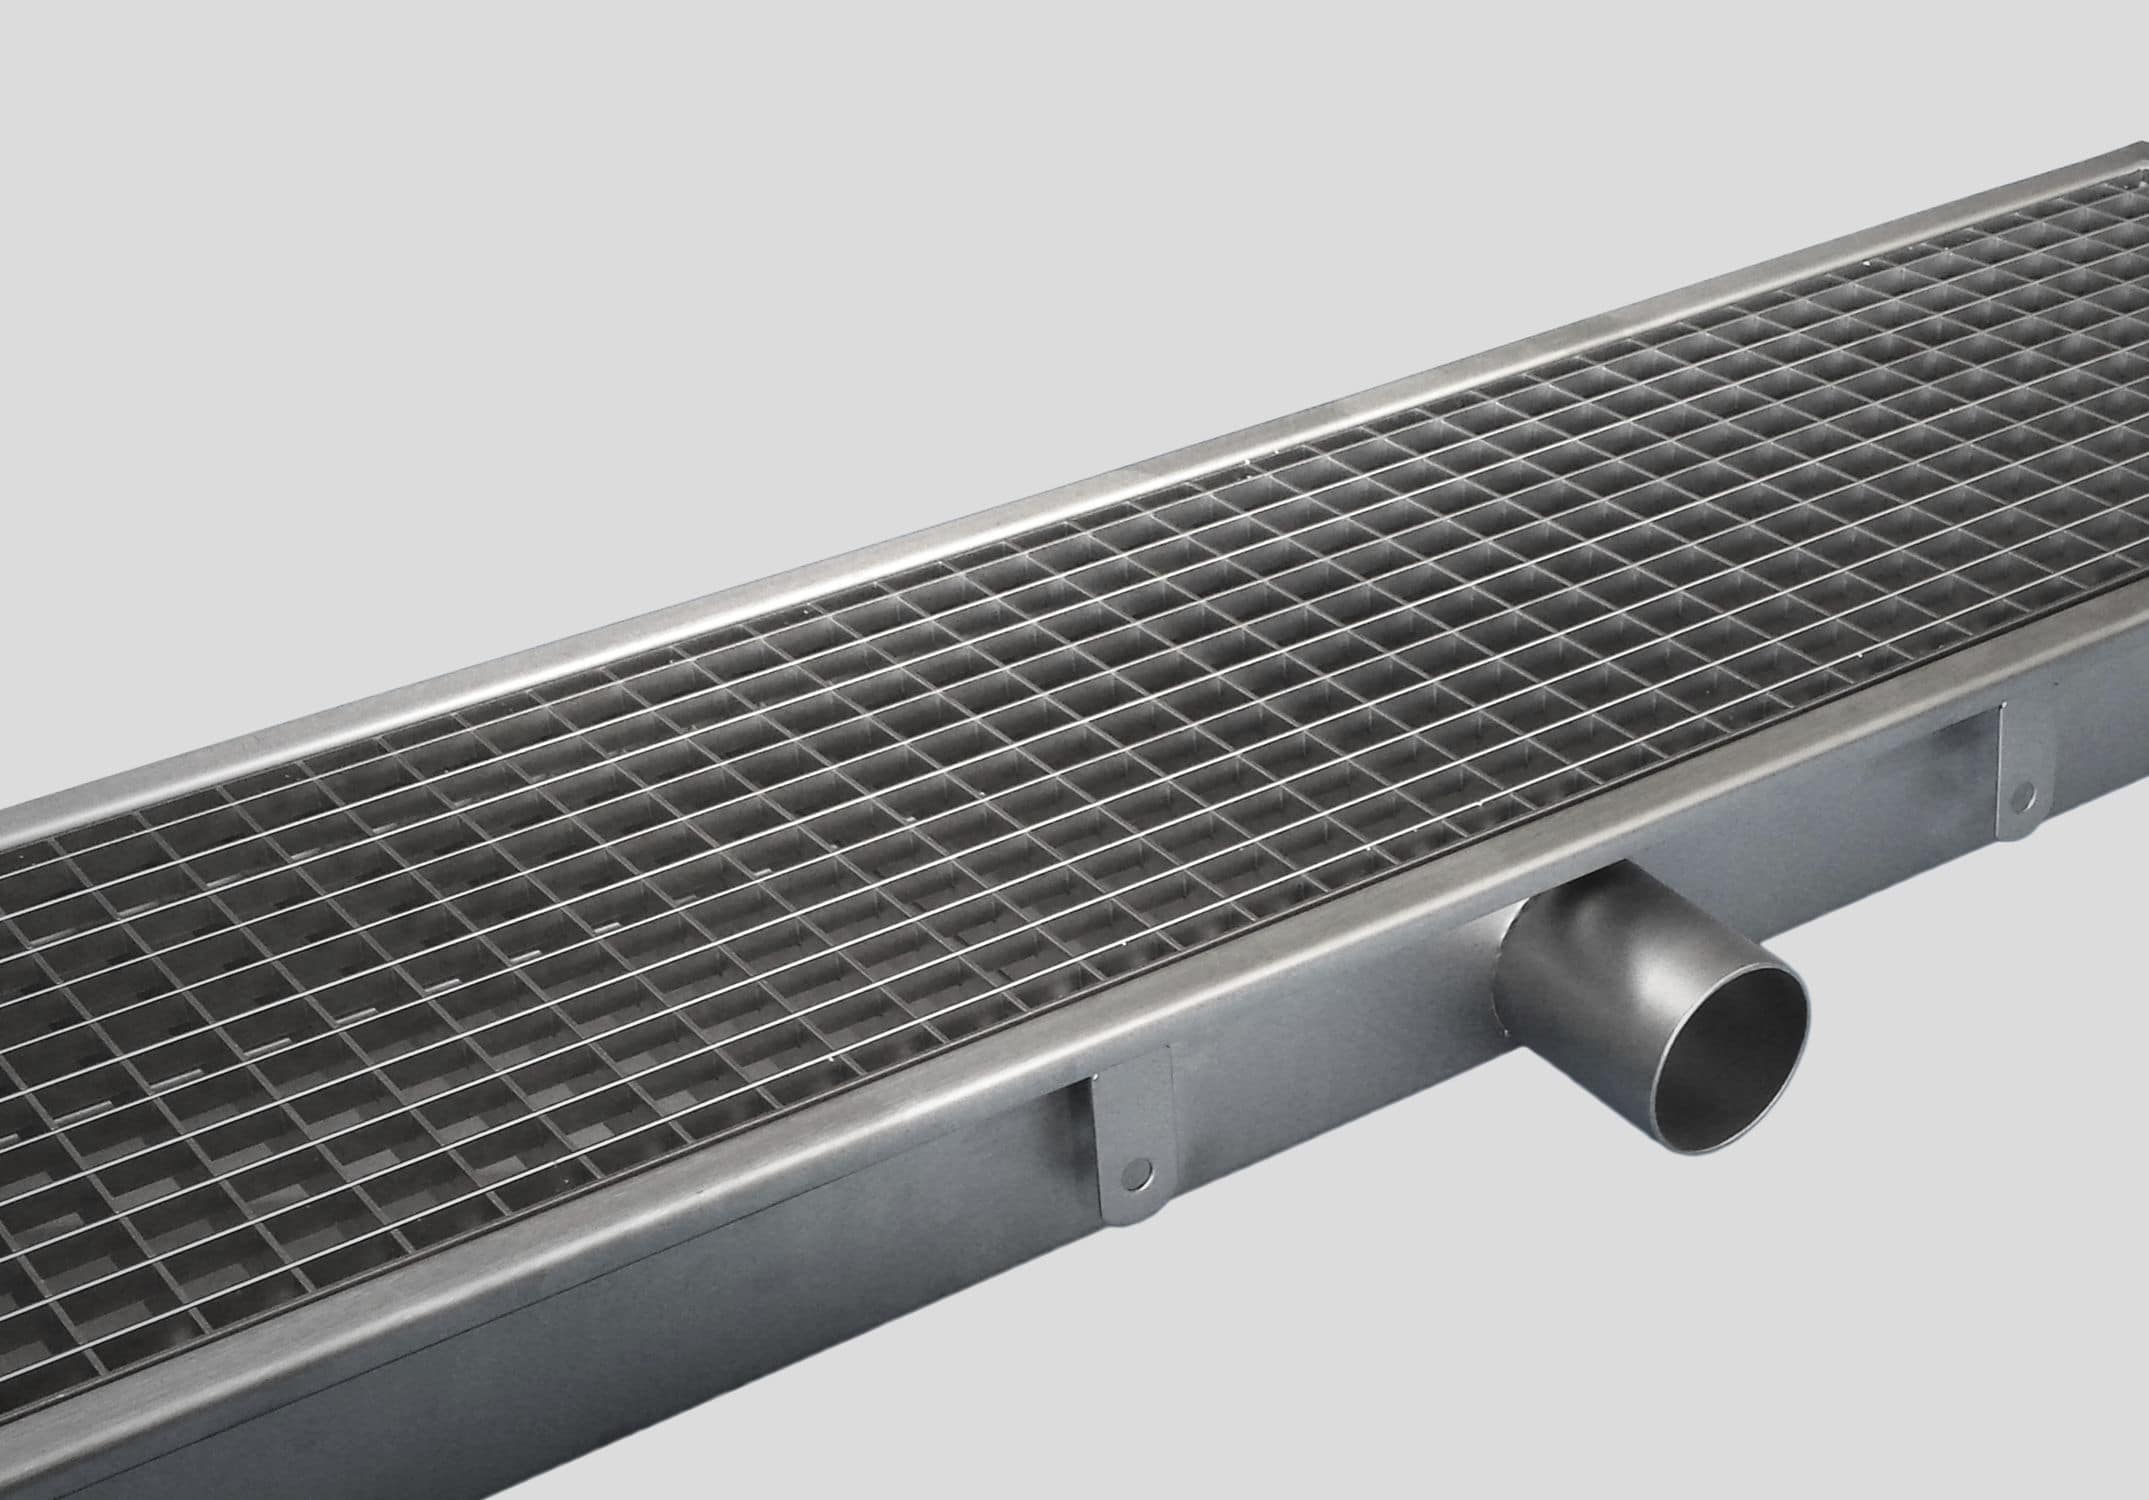 Kitchen drainage channel / stainless steel / with grating